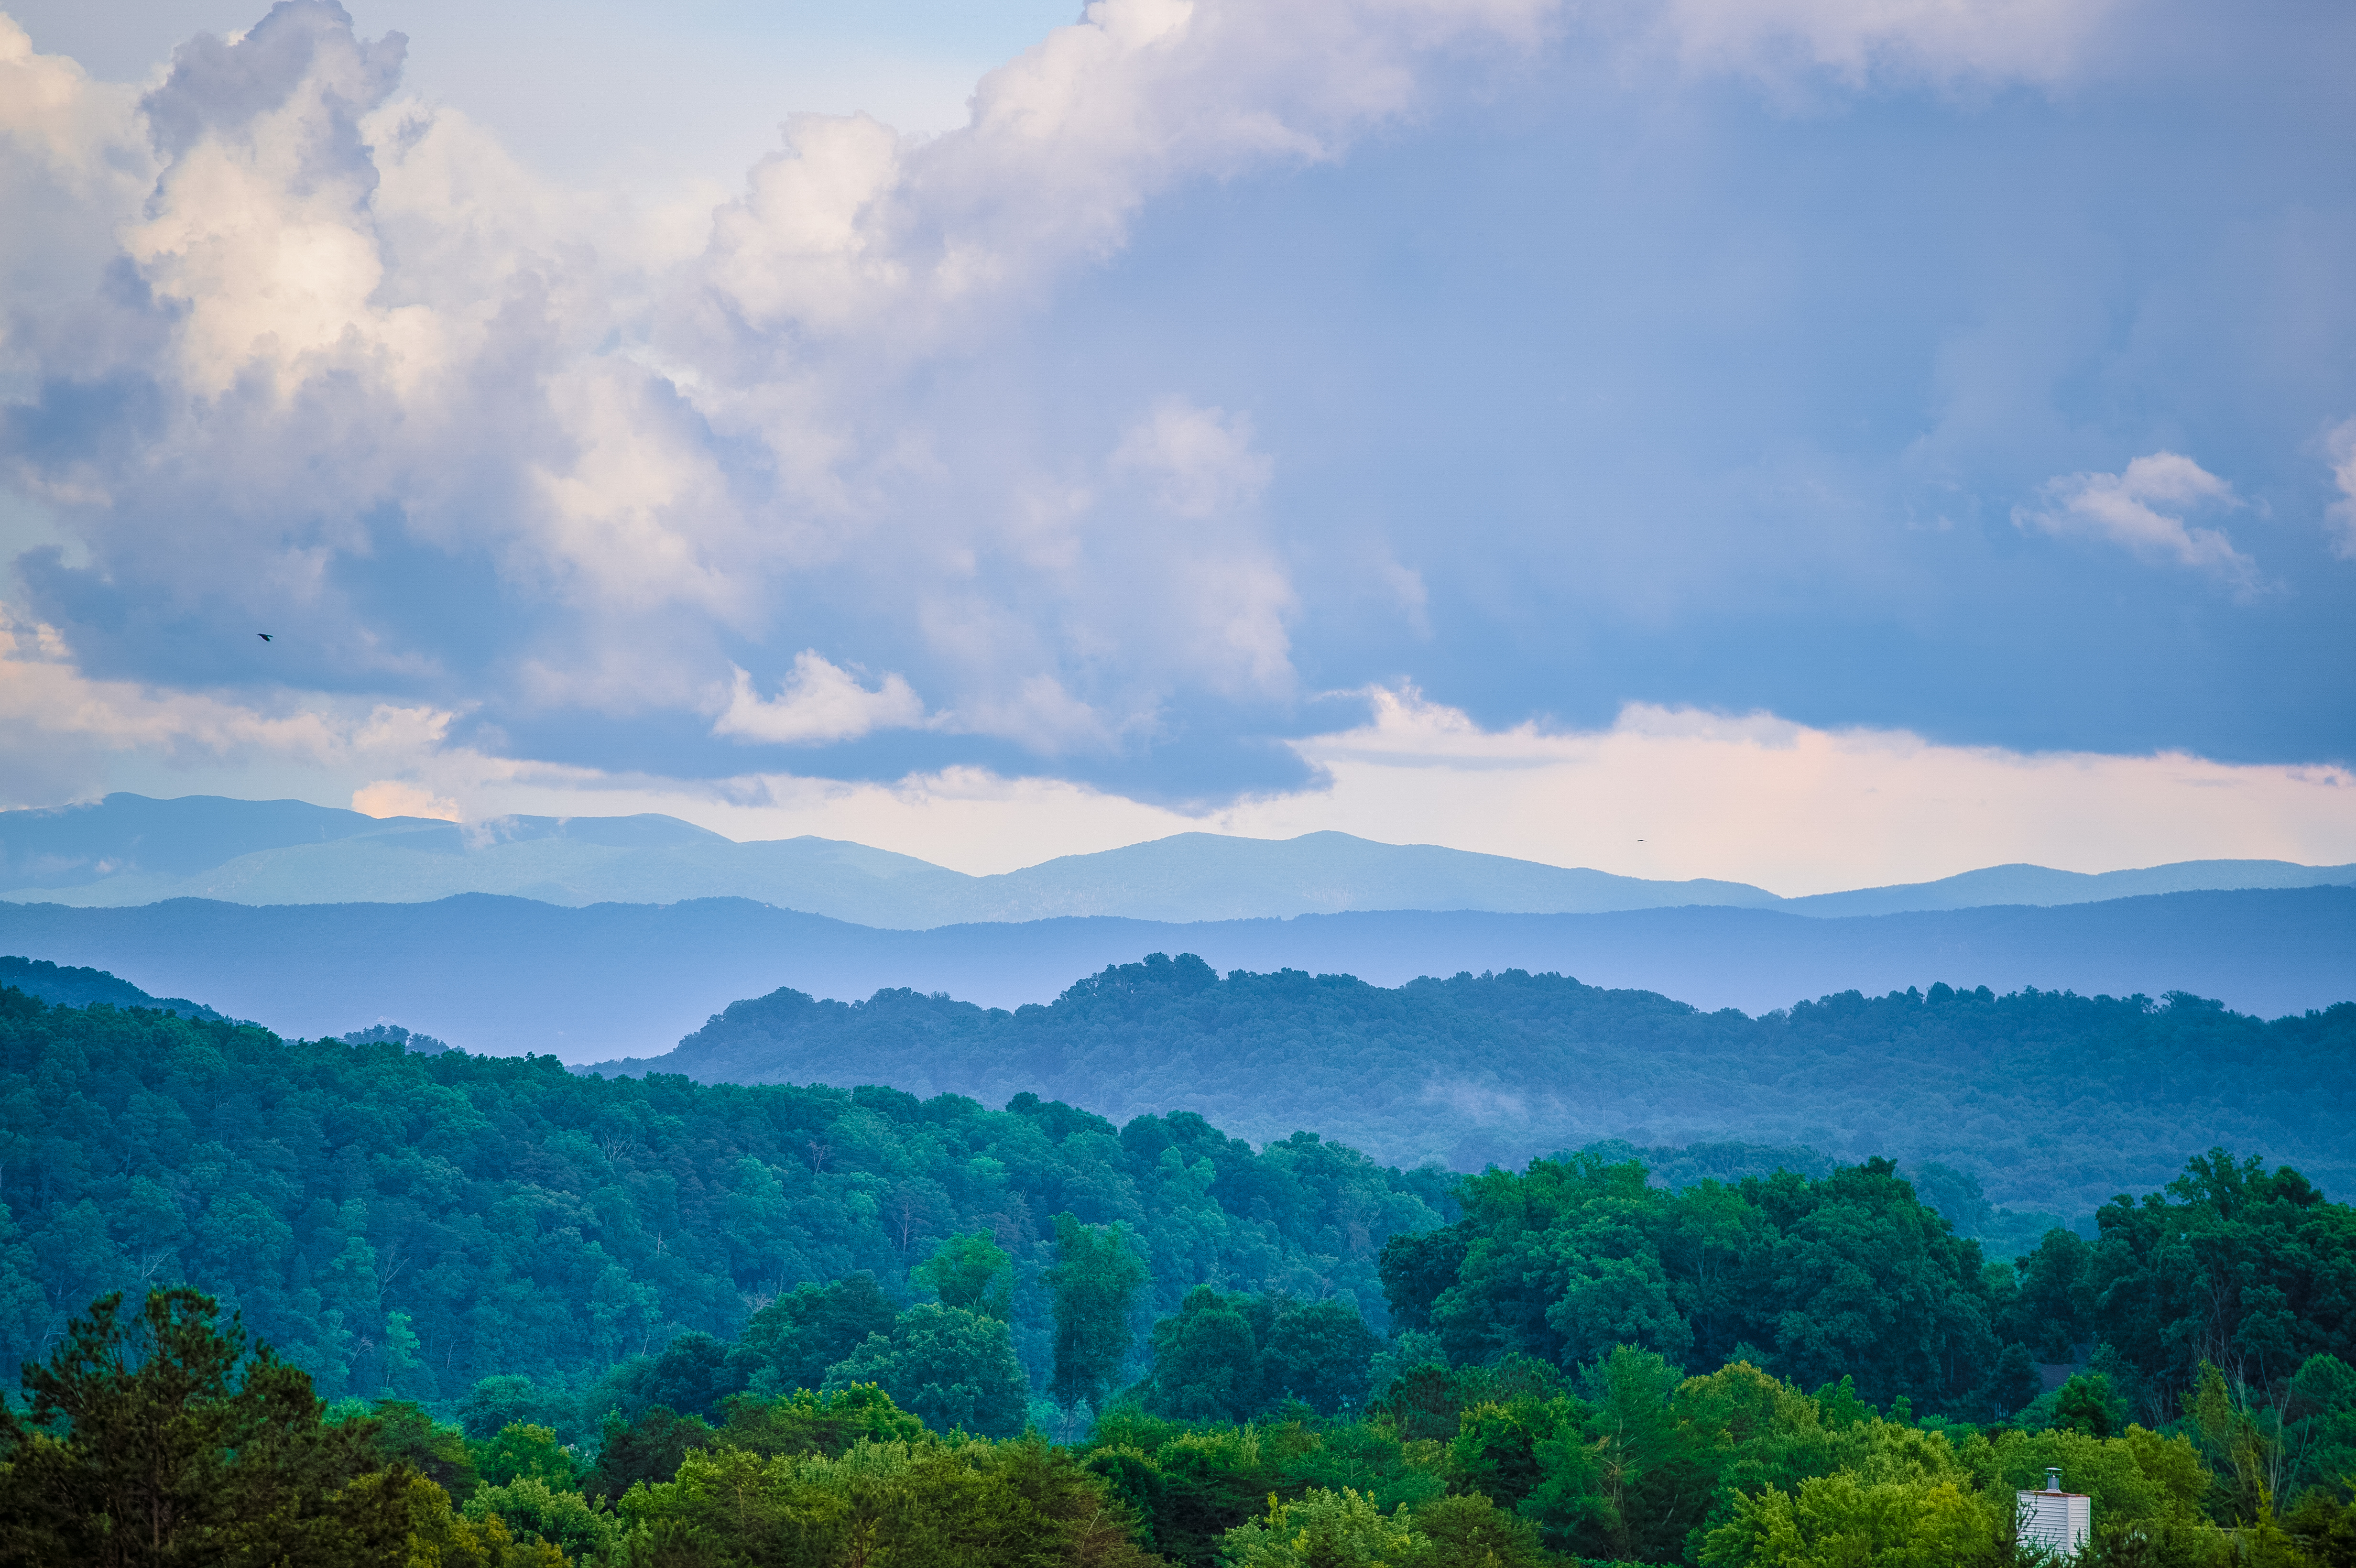 31. The Great Smoky Mountains National Park is in your backyard